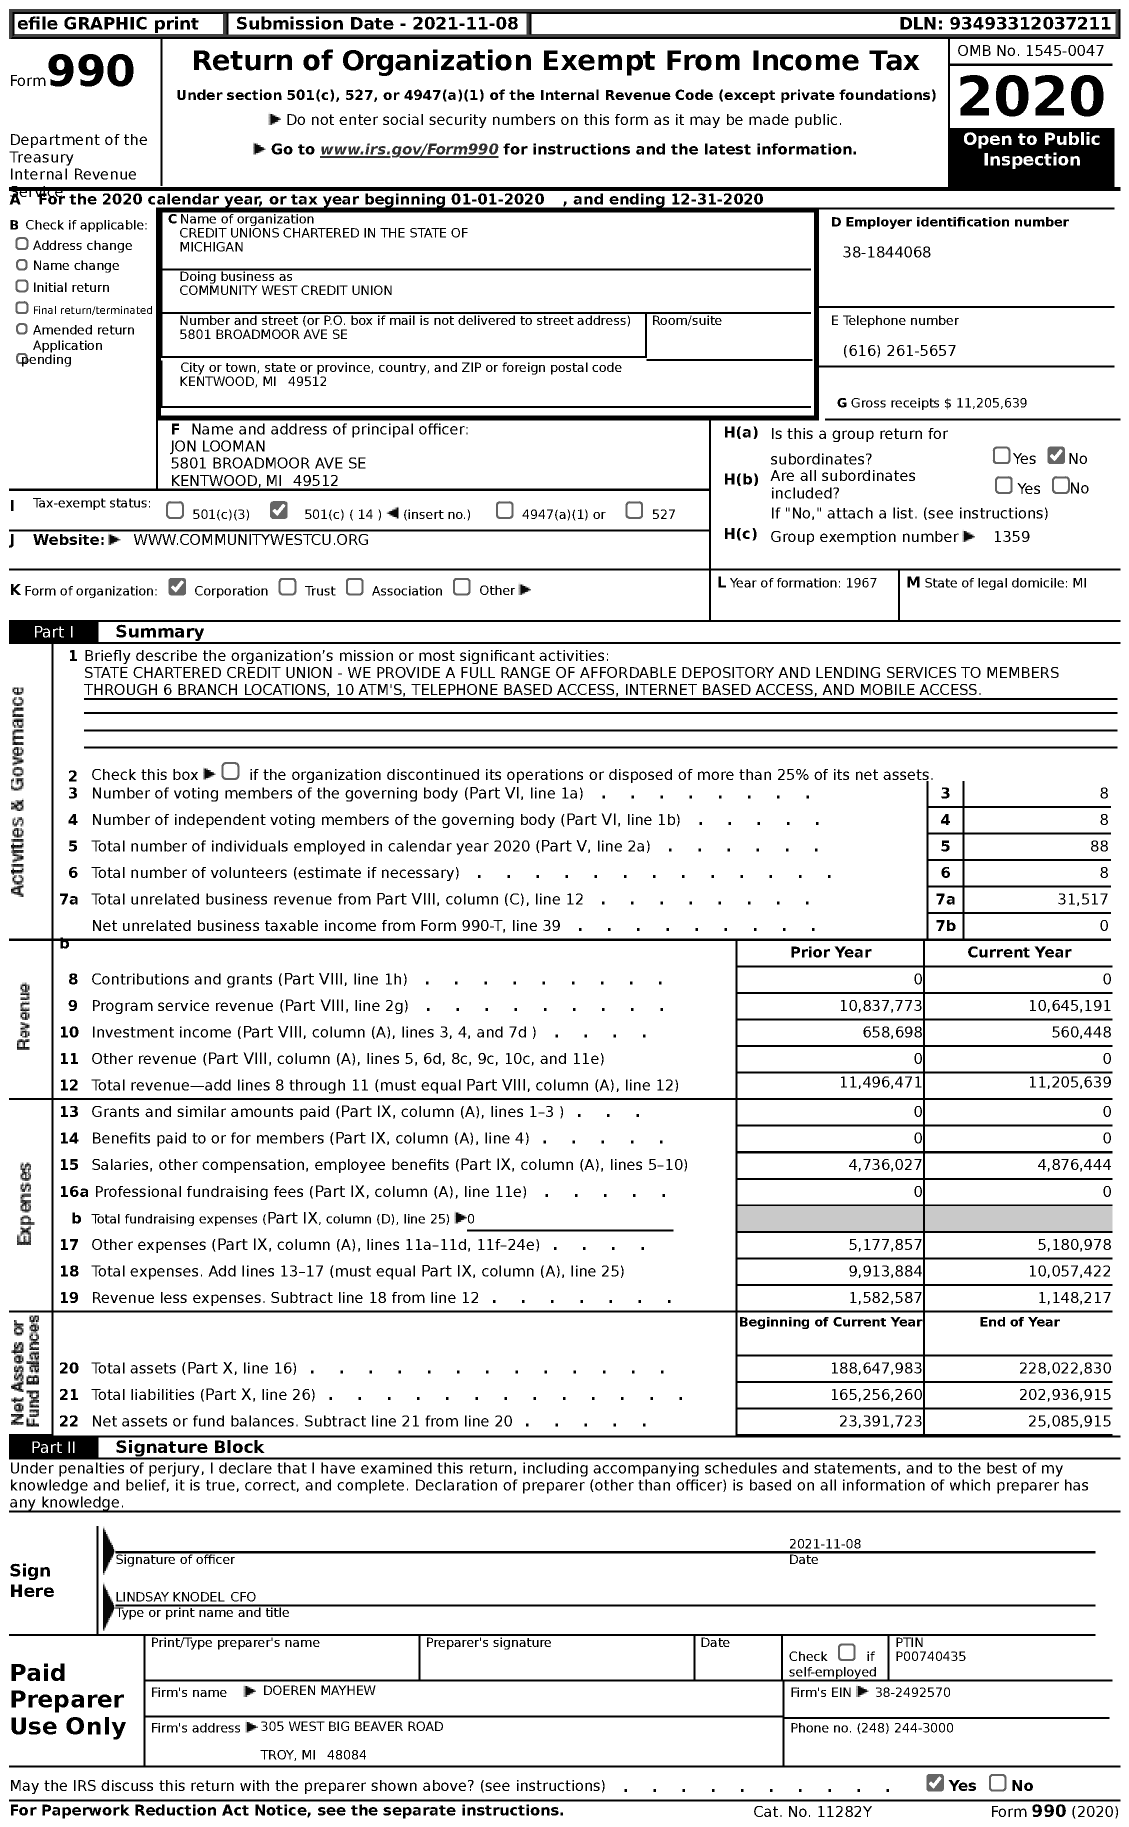 Image of first page of 2020 Form 990 for Credit Unions Chartered in the State of Michigan - 1110 Community West Credit Union